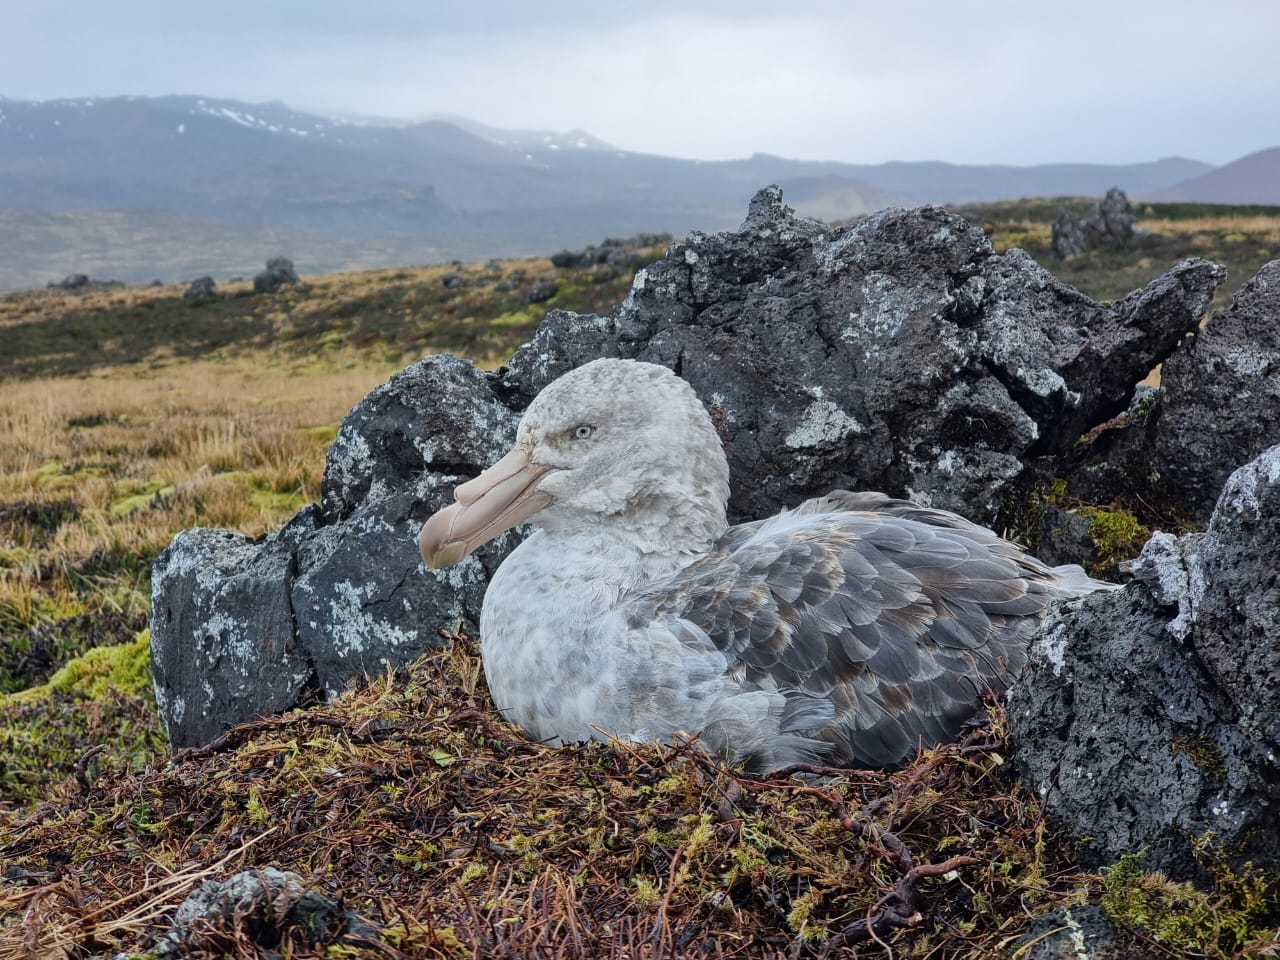 Northern Giant Petrel incubating Marion Michelle Risi